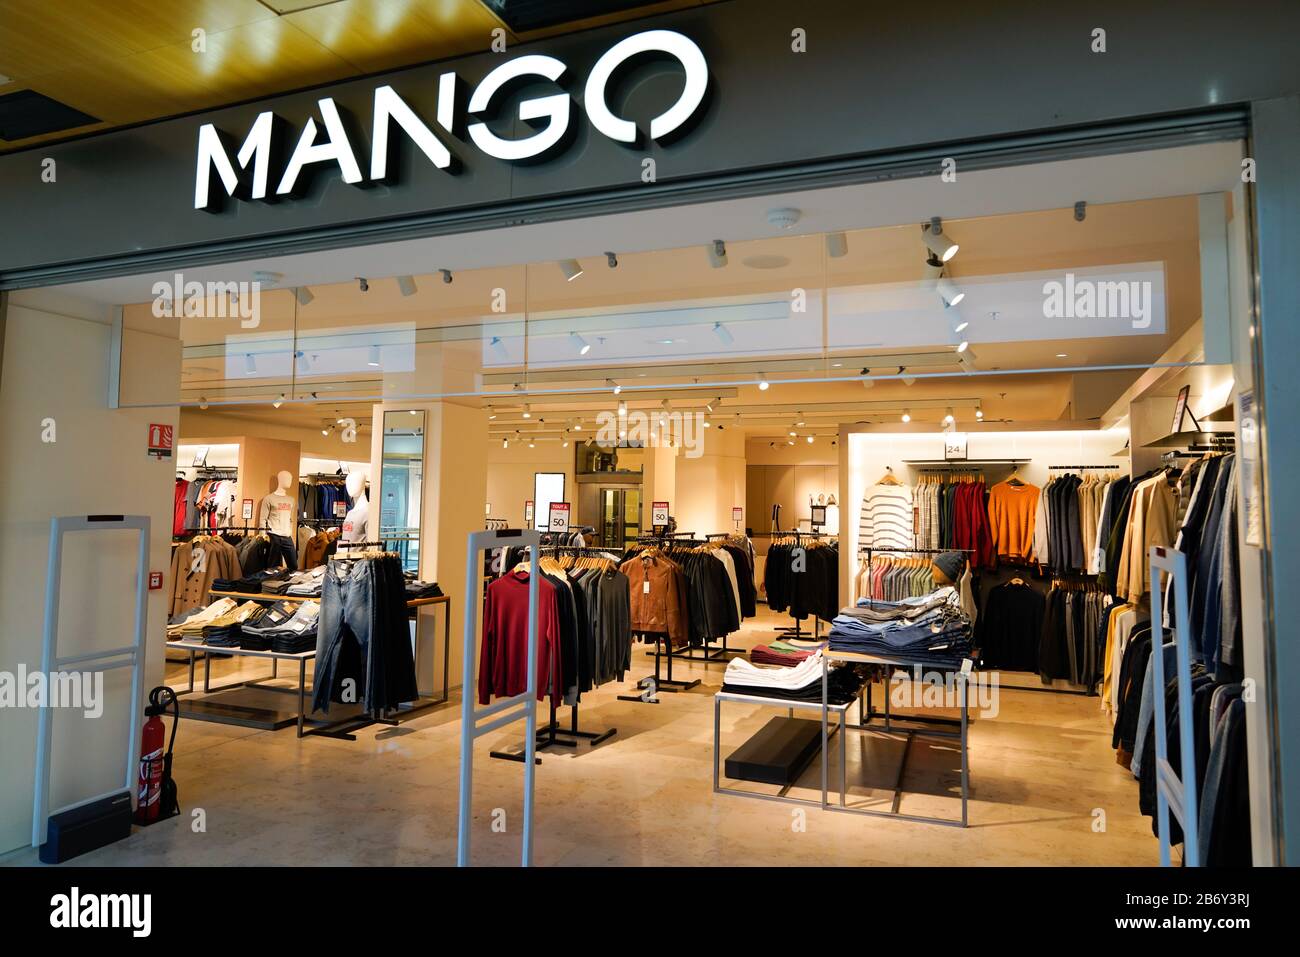 Bordeaux Aquitaine / France - 01 22 2020 : Mango logo Spanish clothes store shop front sign in mall street Stock Photo - Alamy